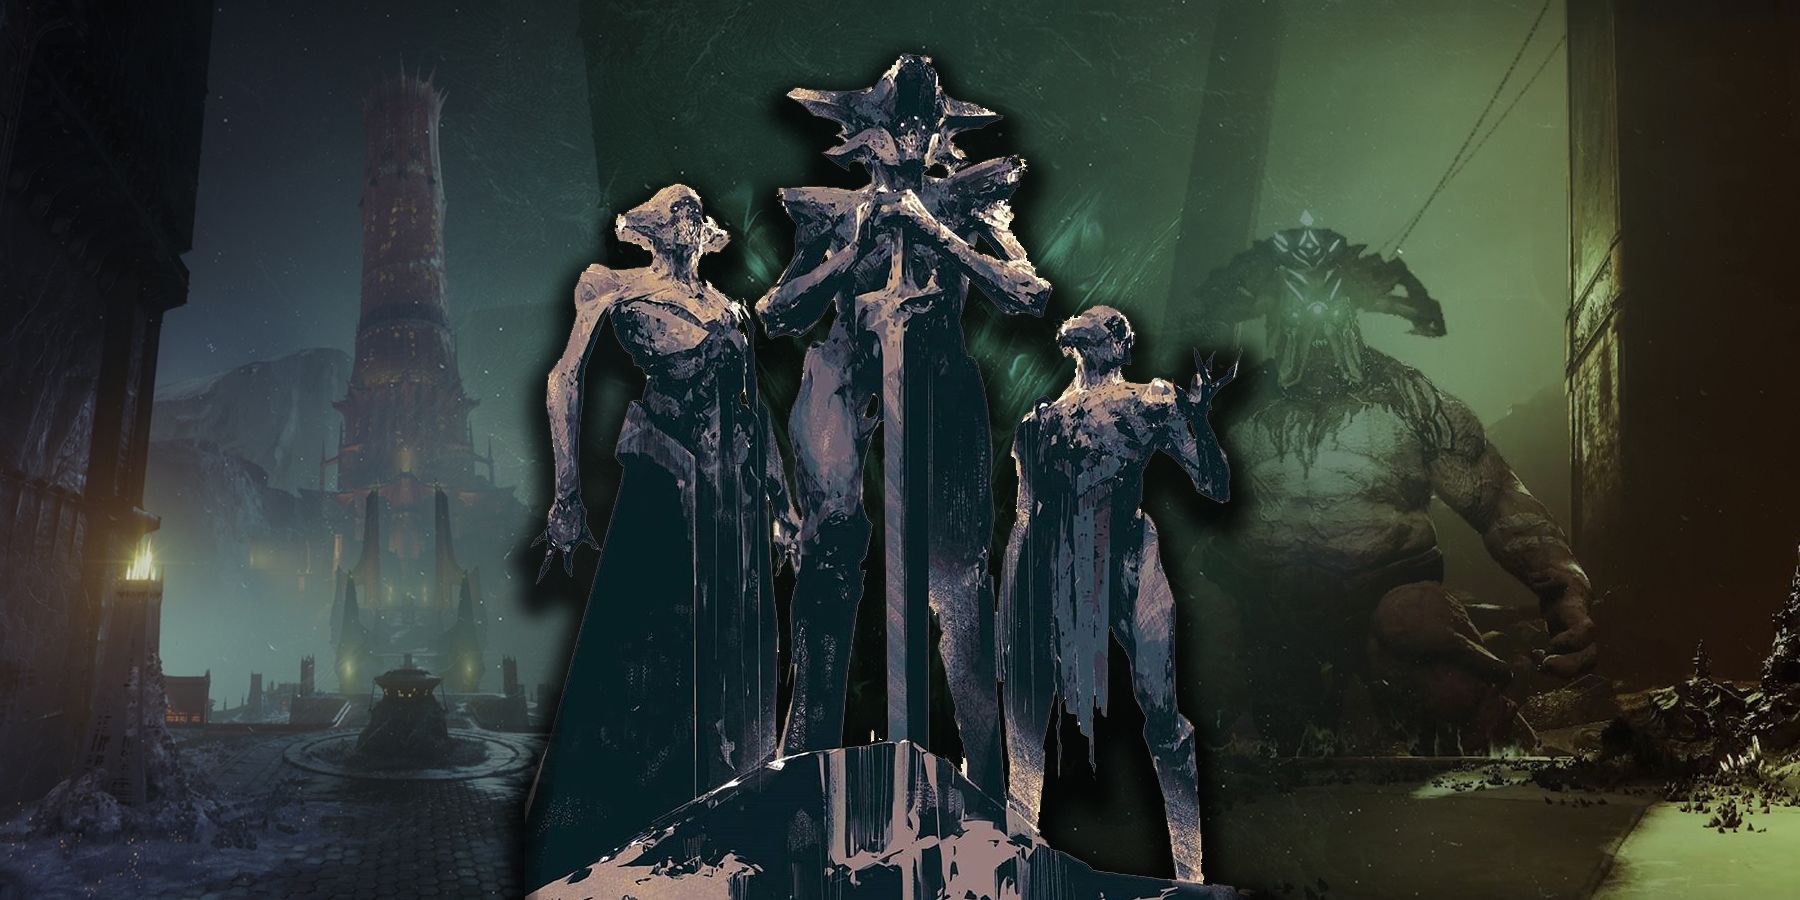 Destiny 2's Hive Gods: Savathun the Witch Queen, Xivu Arath the God of War, and Oryx the Taken King.